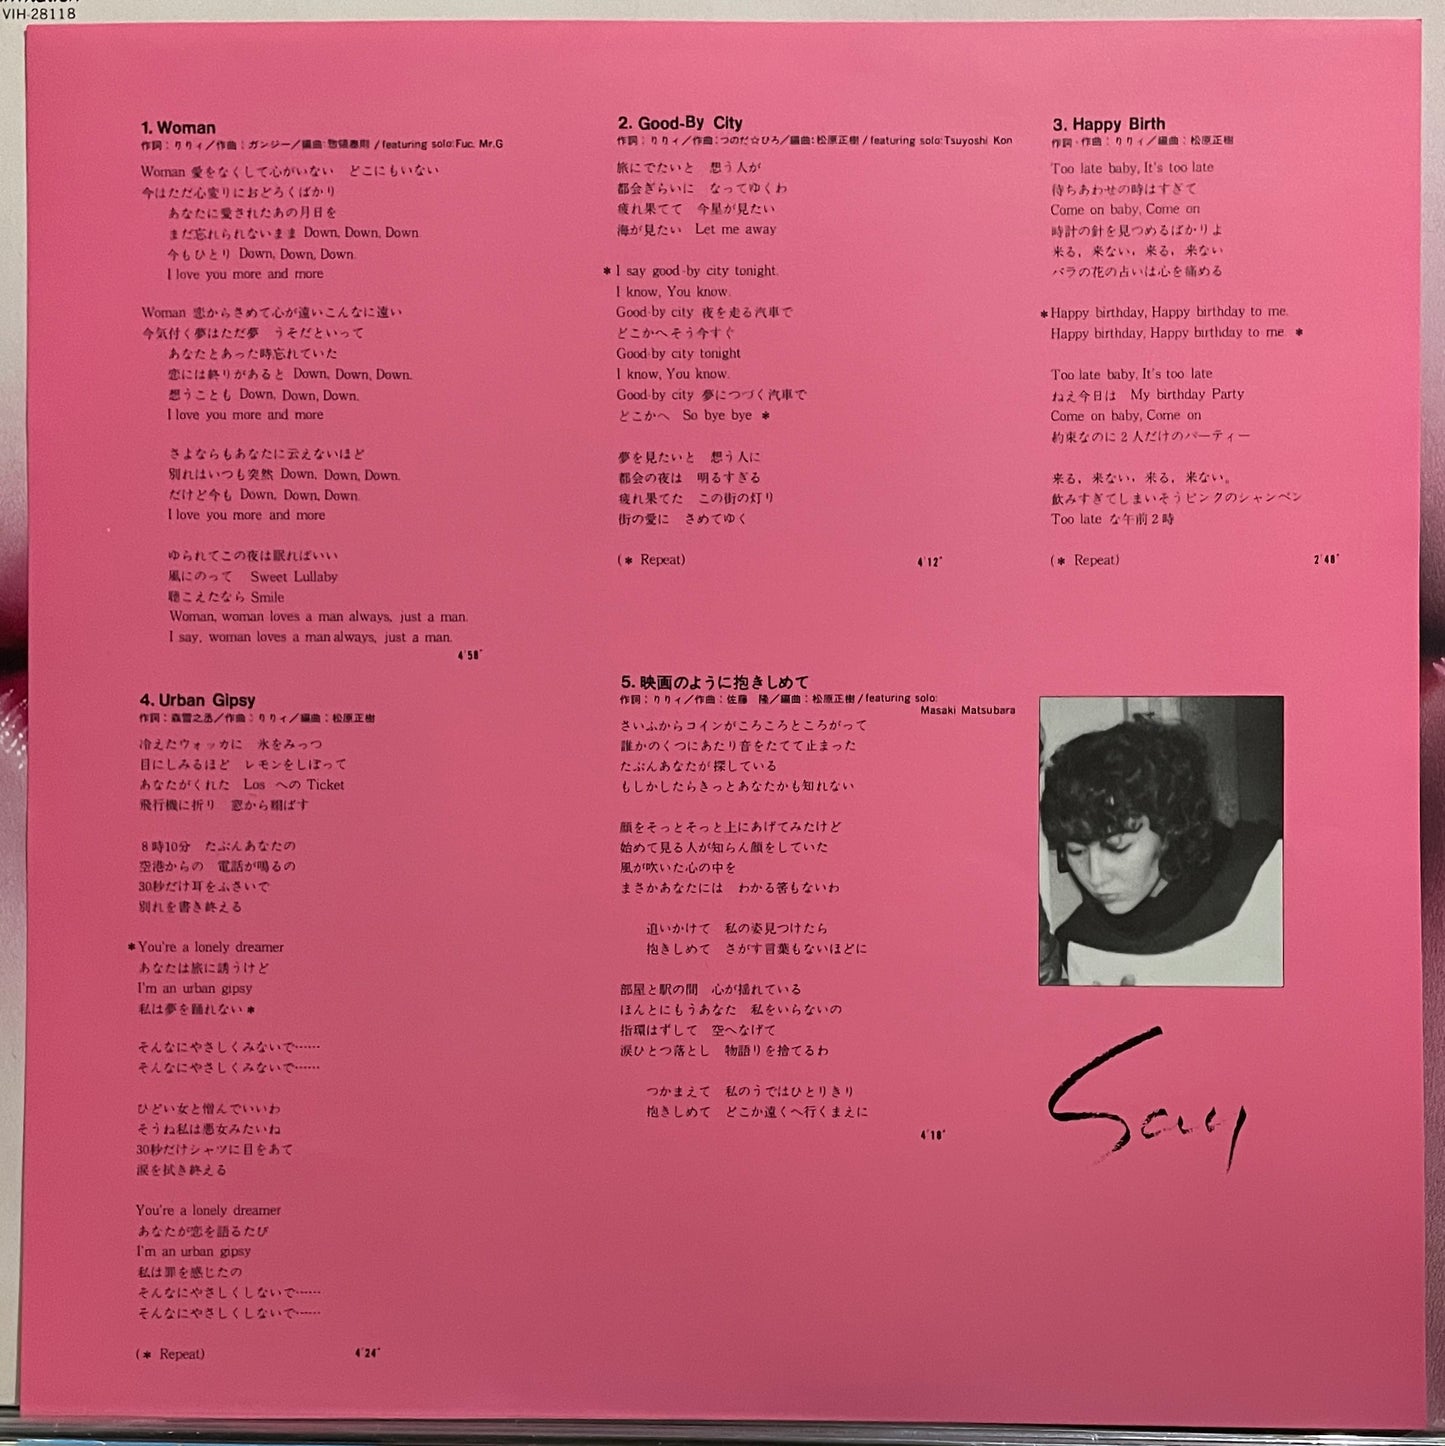 Lily “Say” (1983)